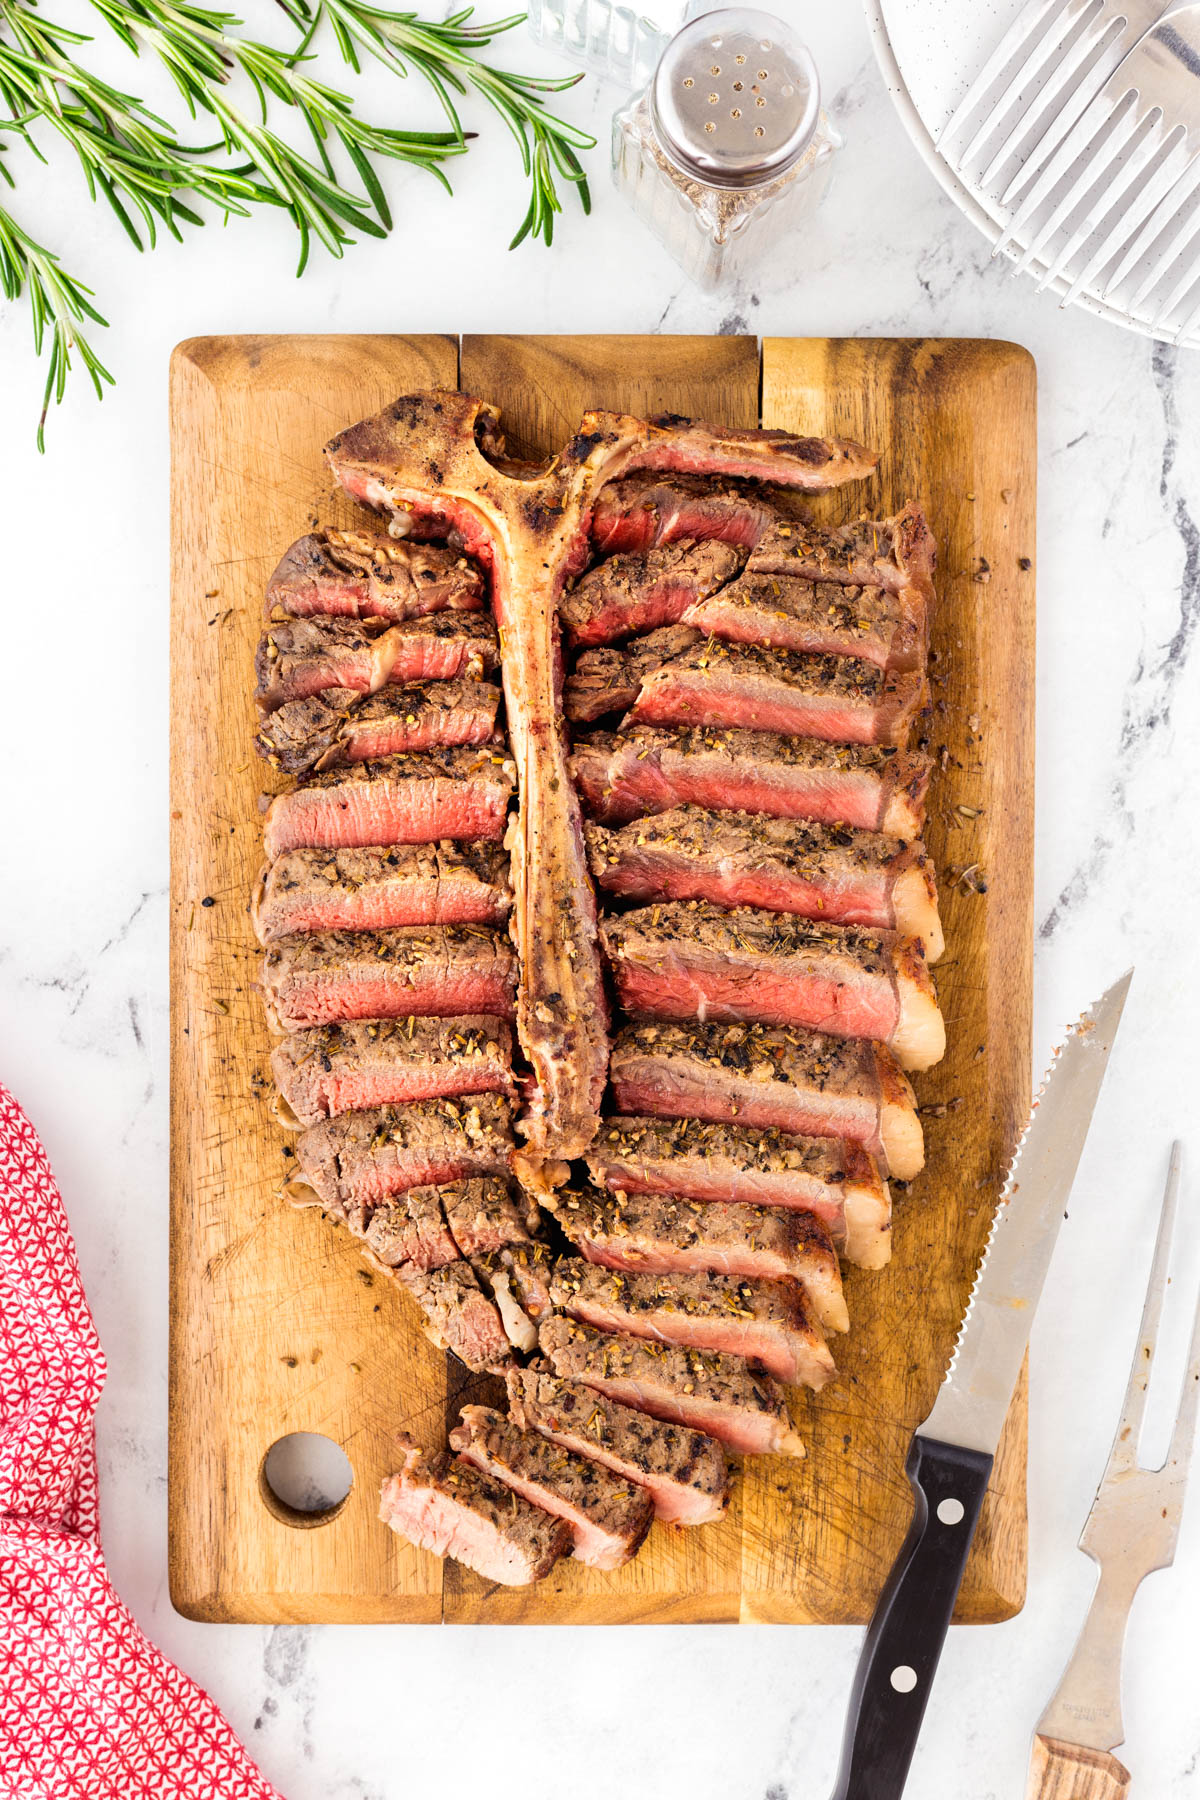 Grilled porterhouse steak sliced on a wooden cutting board and the meat replaced against the T-bone.